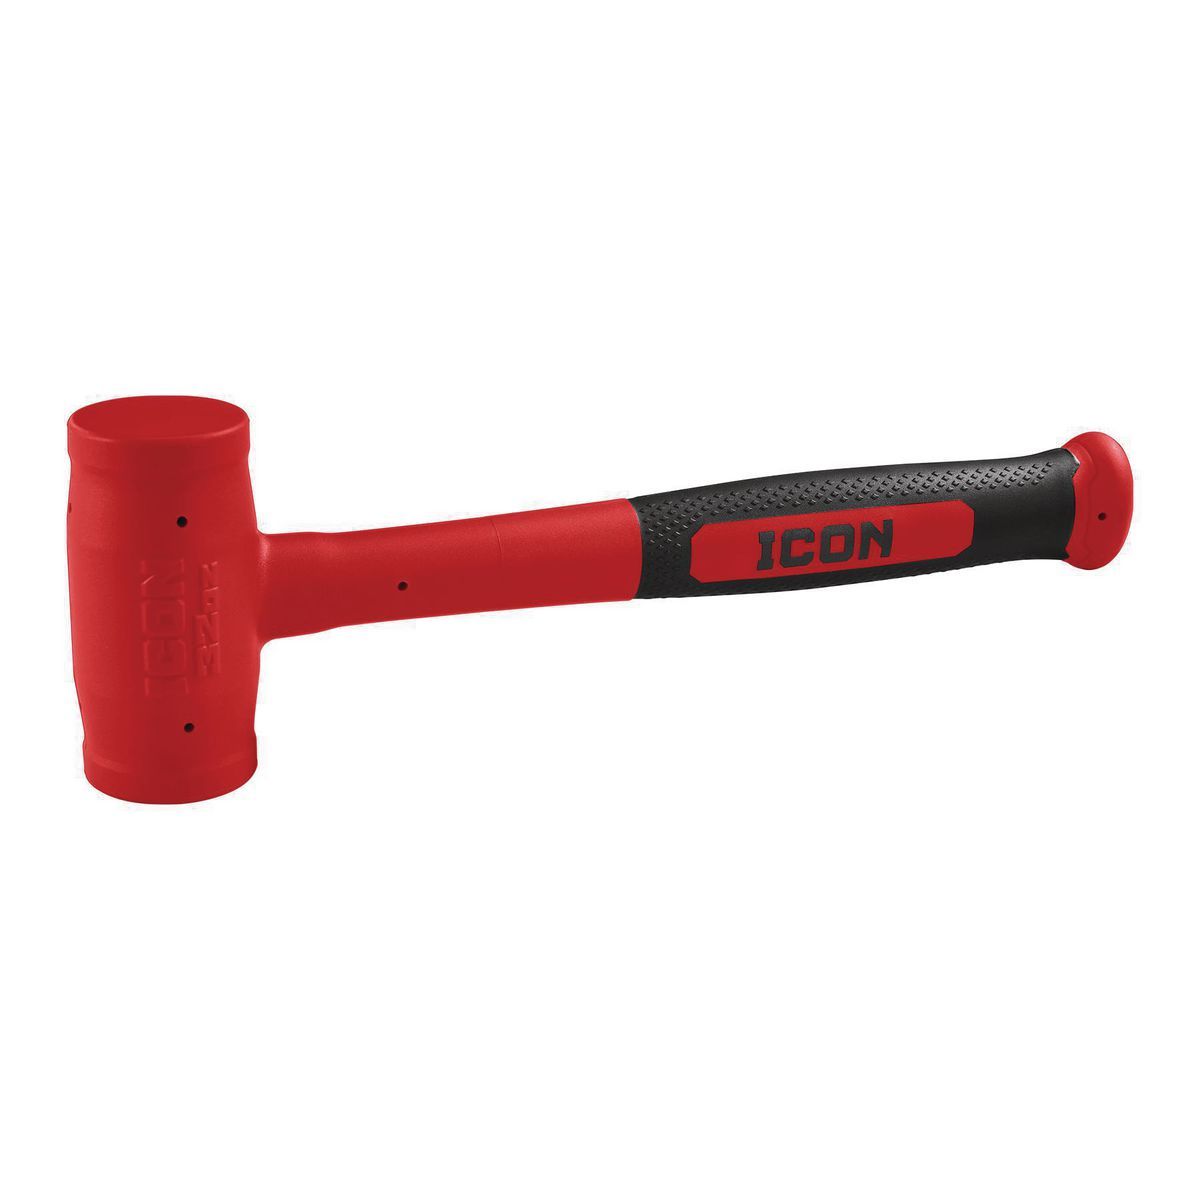 ICON 32 oz. Soft Face Dead Blow Hammer